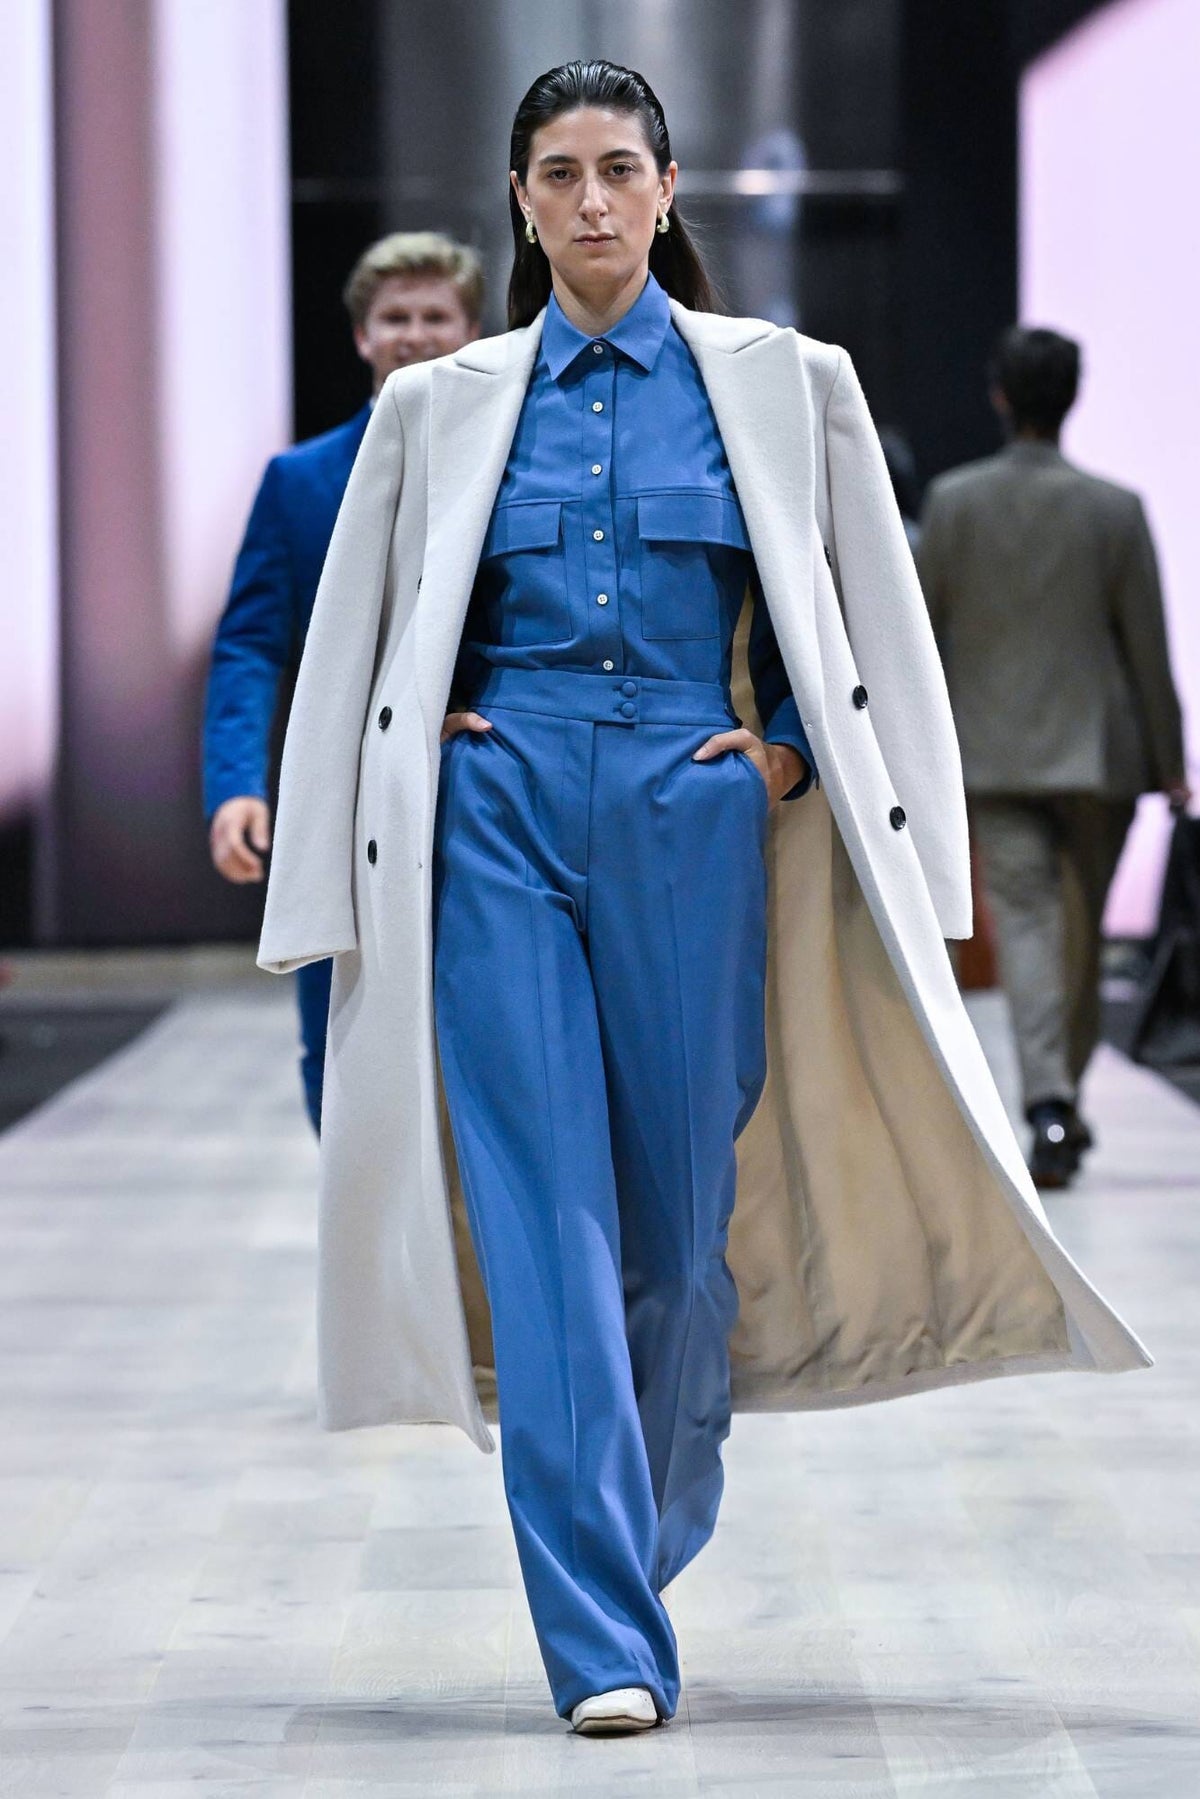 LOOK 11 - Claudia Long DB Coat in Winter White Wool + Naomi Utility Shirt in Wedgwood Blue Wool with Matching Emma Trouser